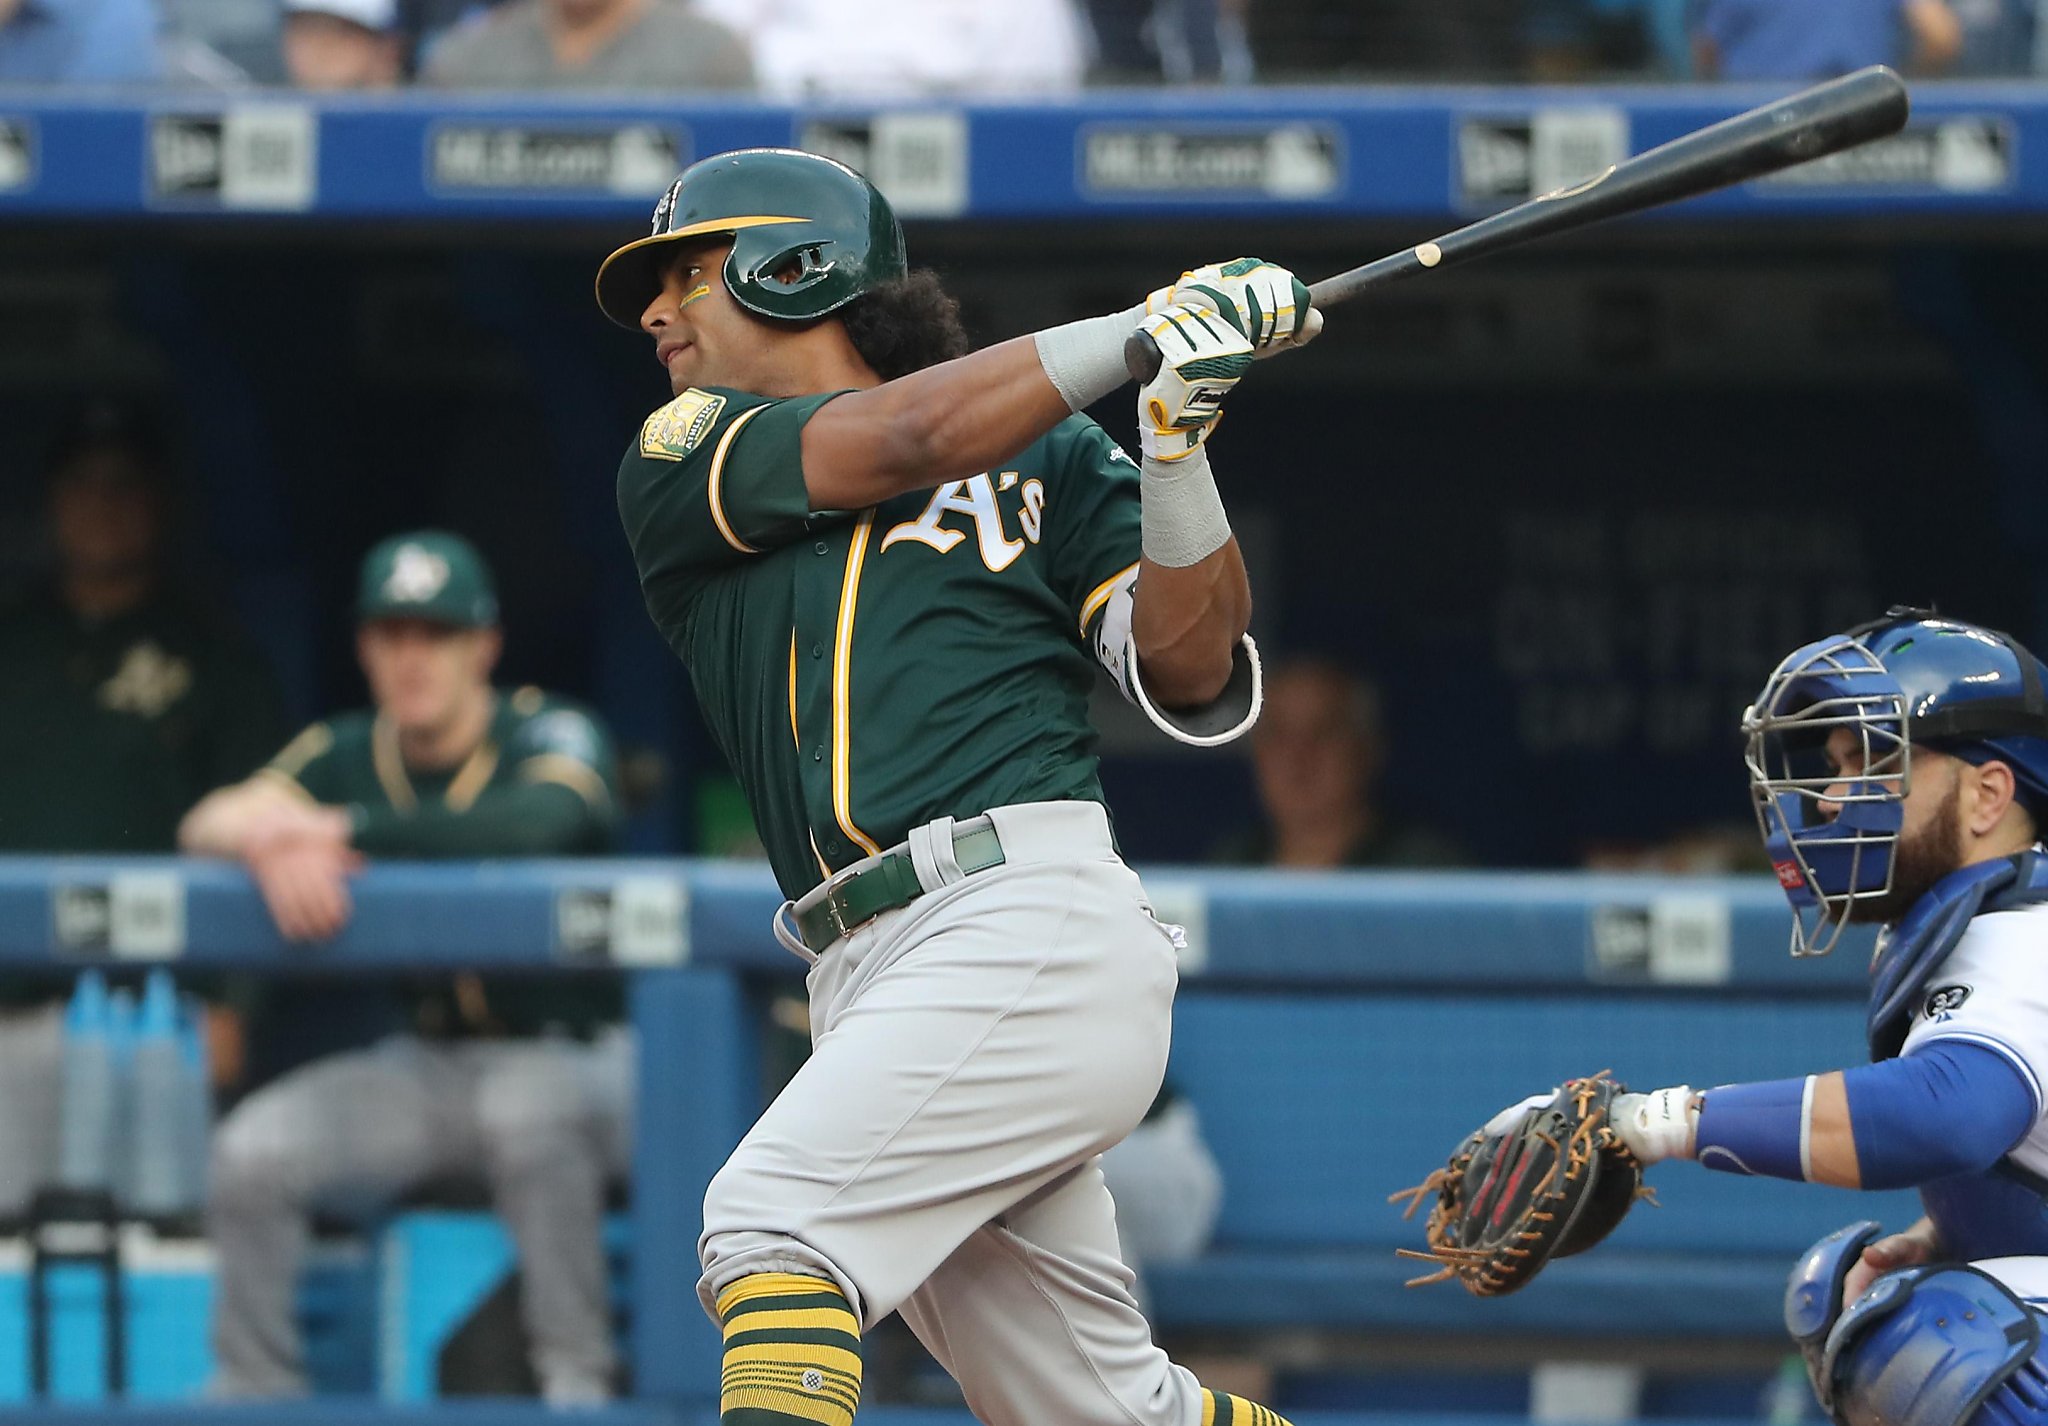 Khris Davis signed by Oakland Athletics to minor league deal